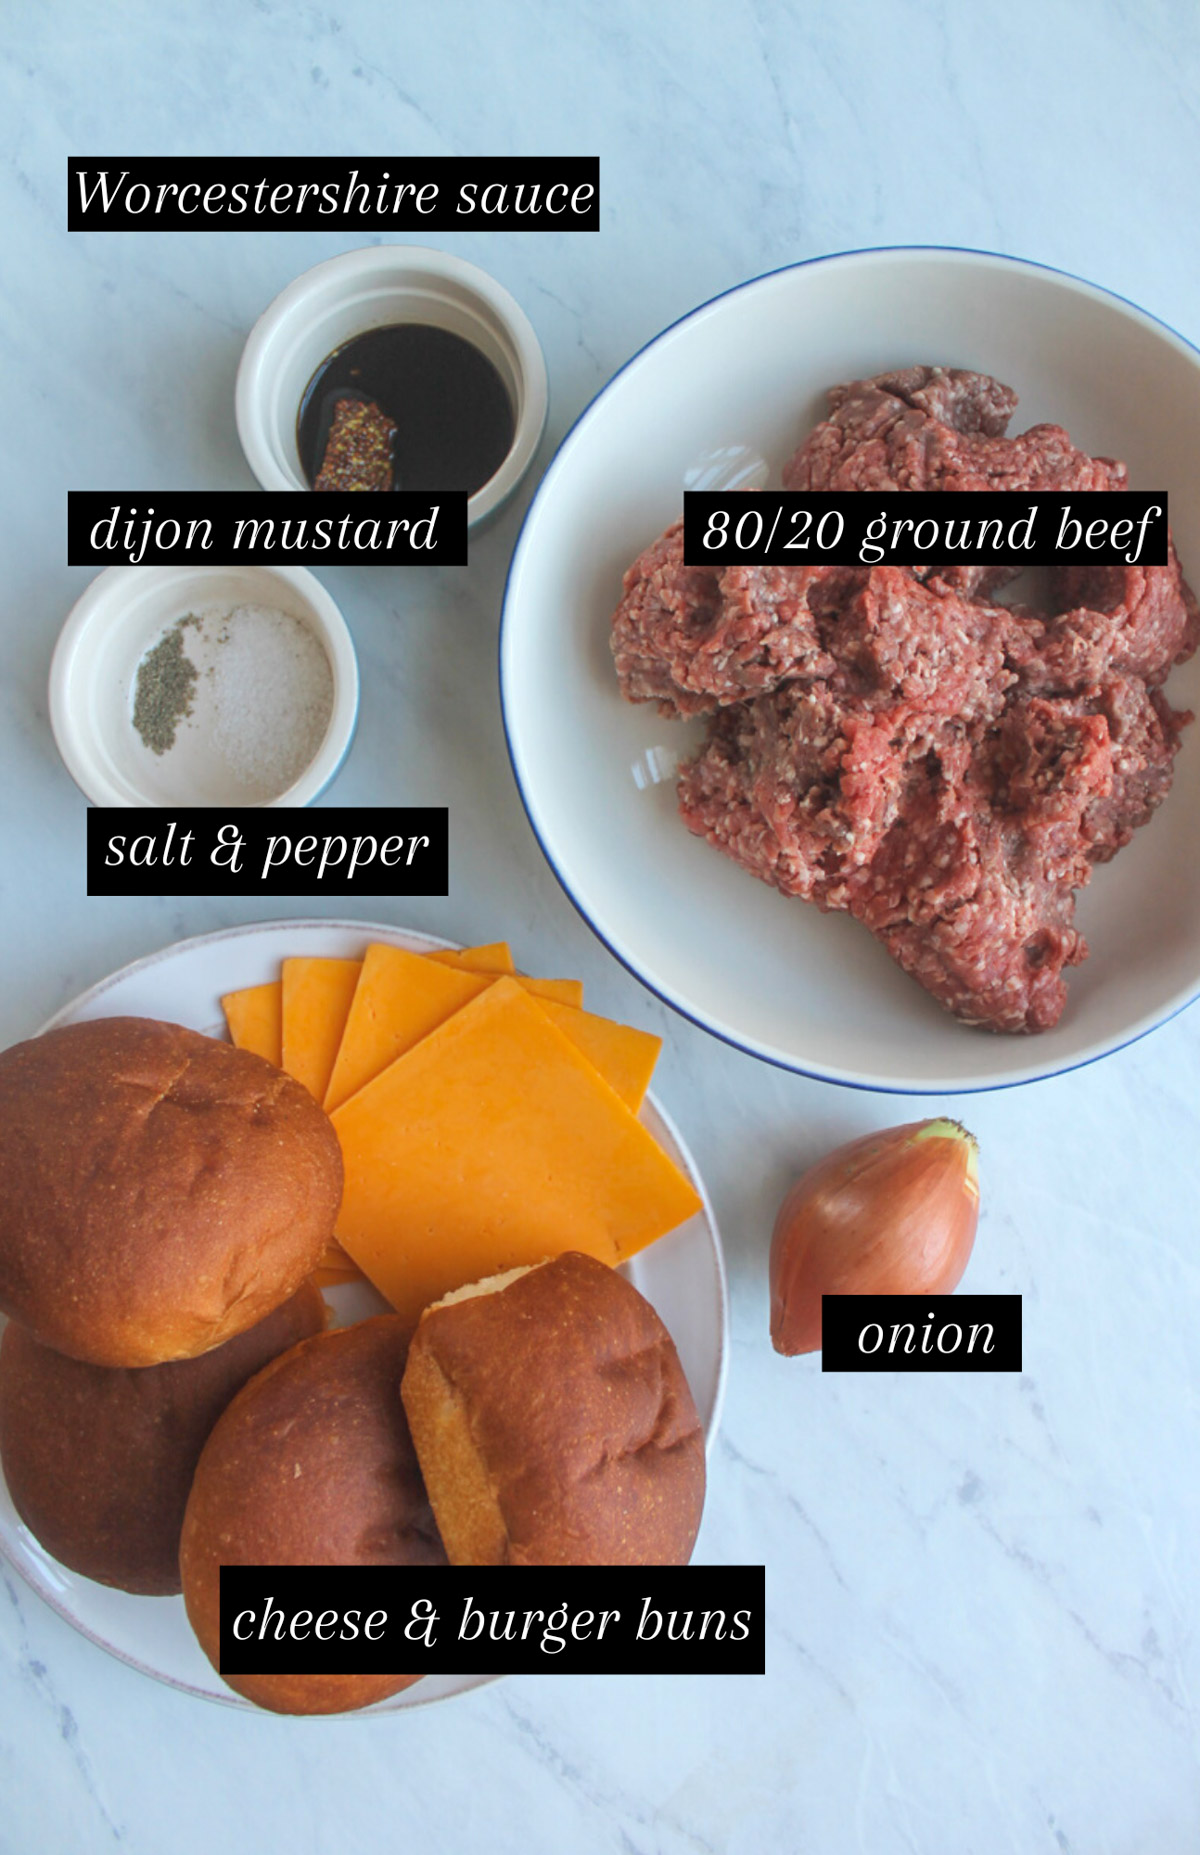 Labeled ingredients for cast iron skillet burgers.